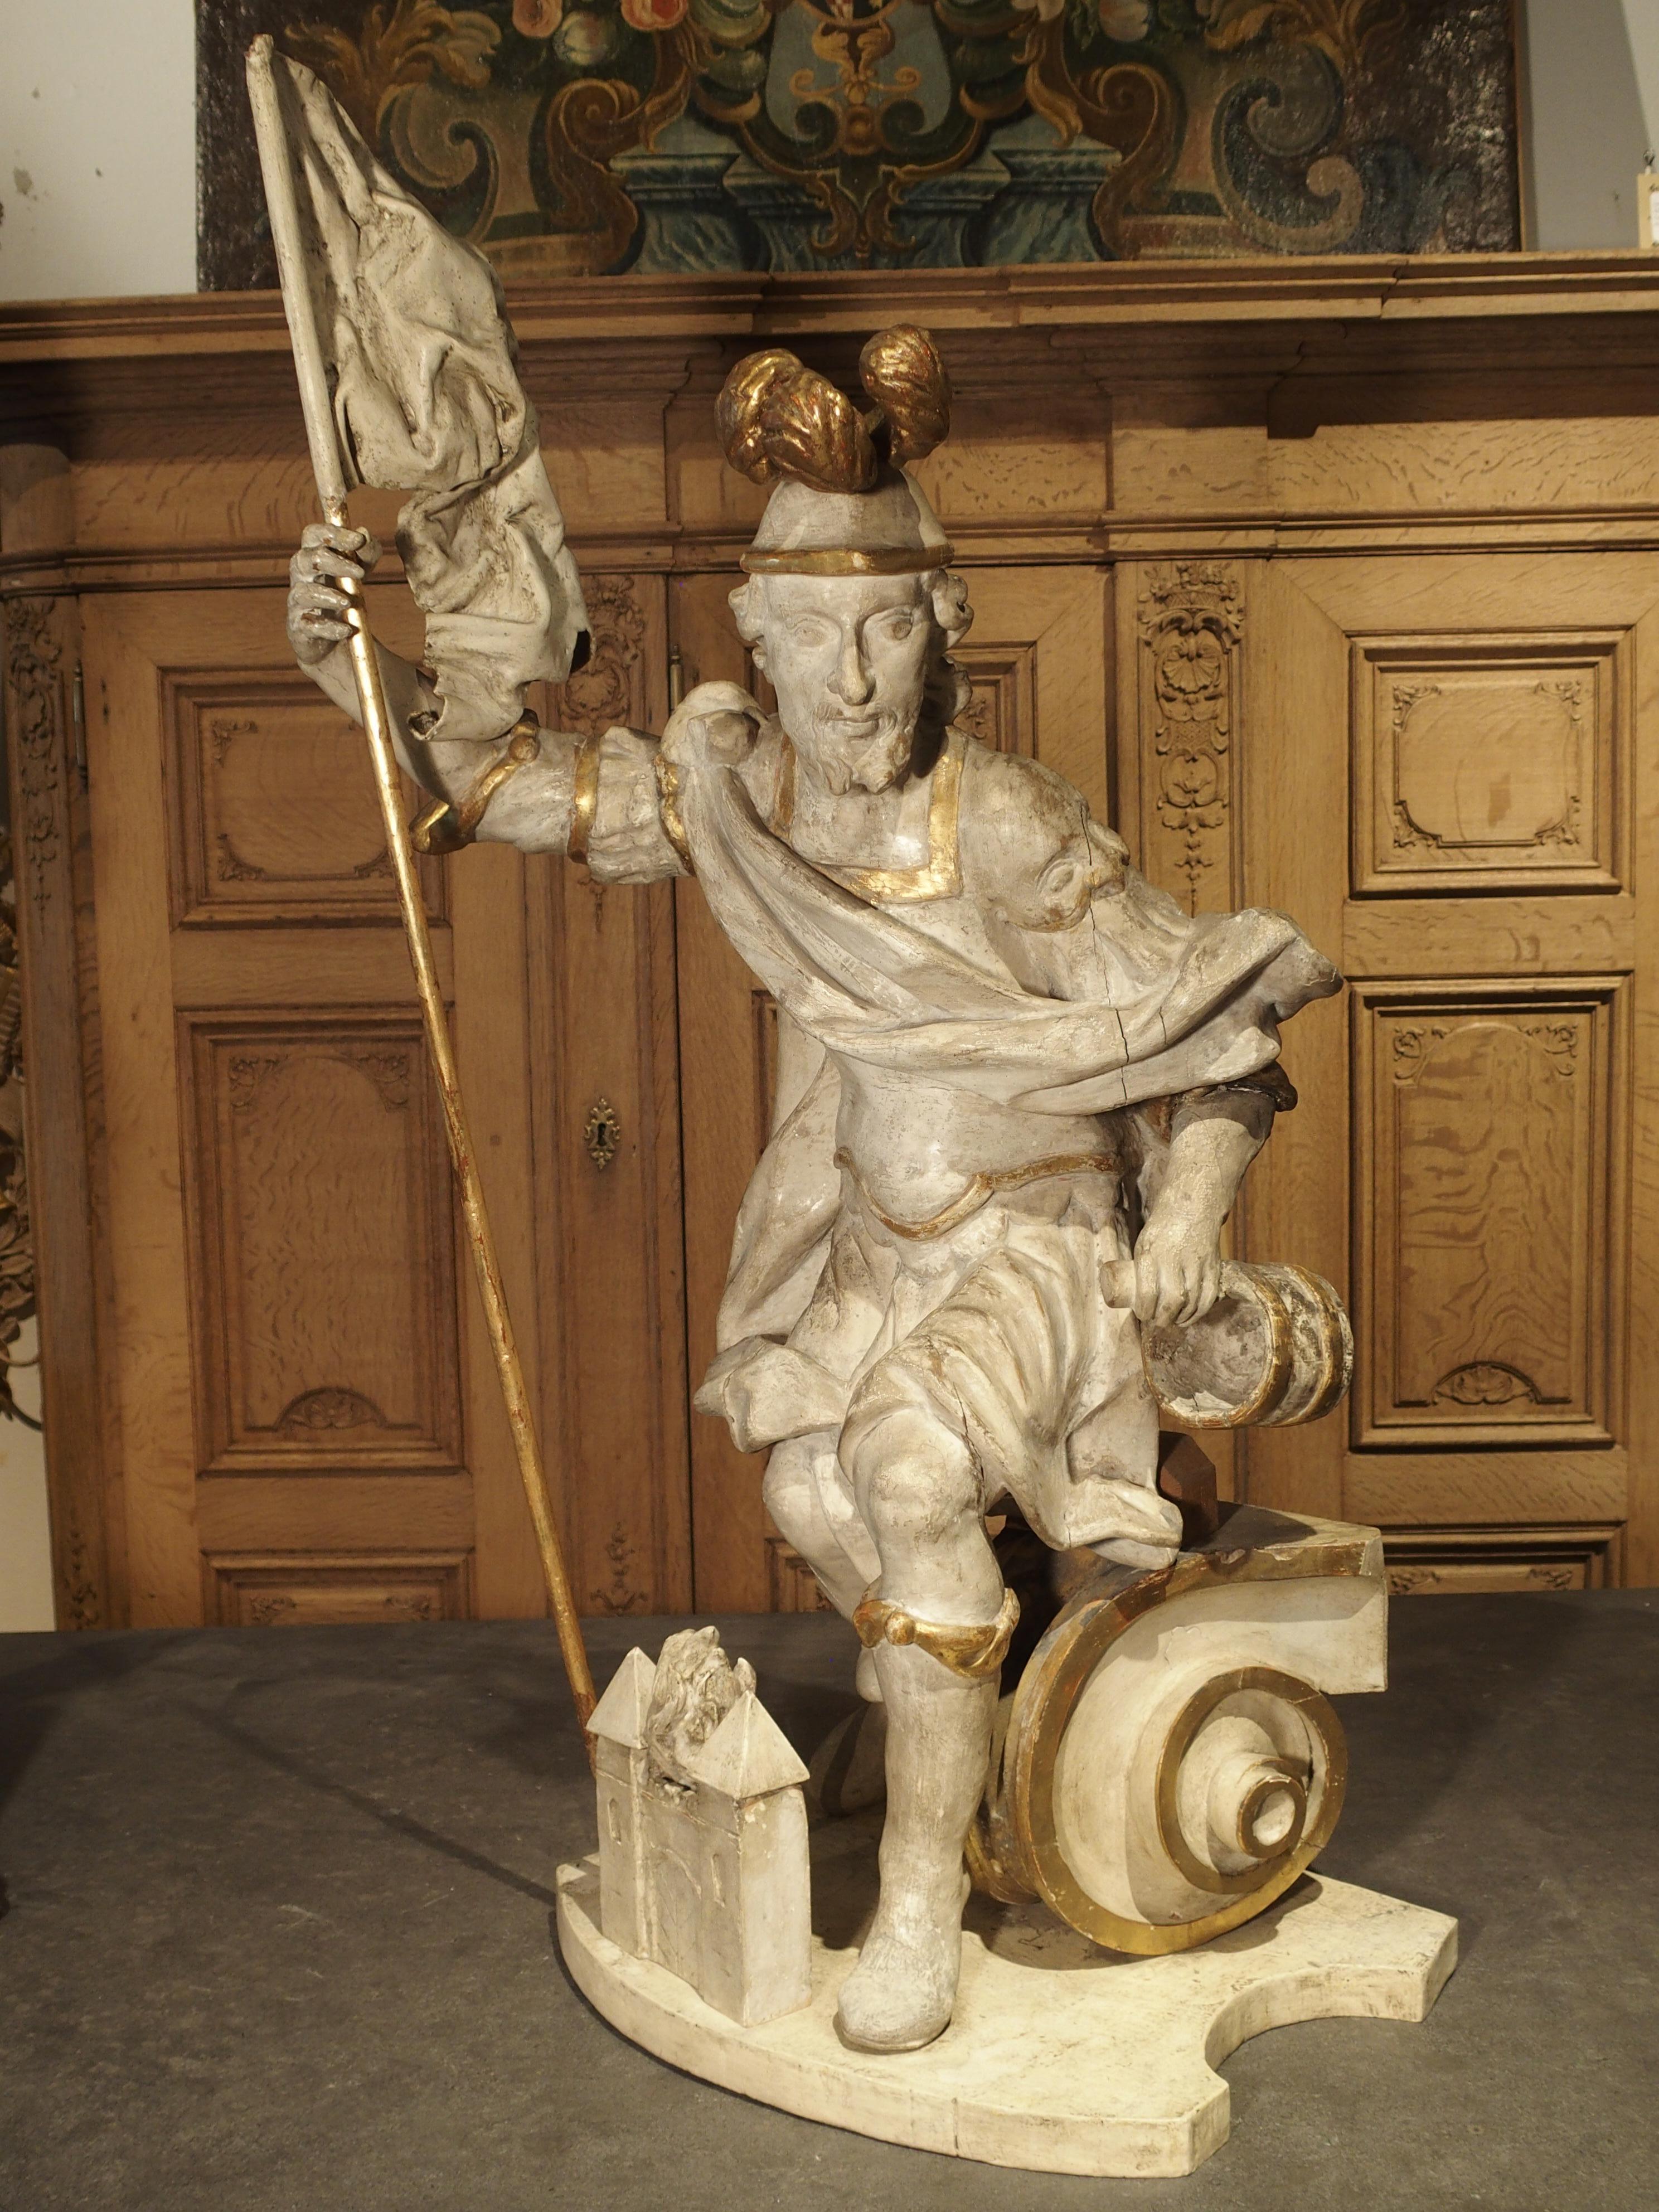 St. Florian (250 A.D. – 304 A.D.), was a the patron saint of firefighters, brewers, chimney sweeps, and the town of Linz, Austria. He served in the Roman army and part of his duties included organizing fire fighting brigades. He was secretly a